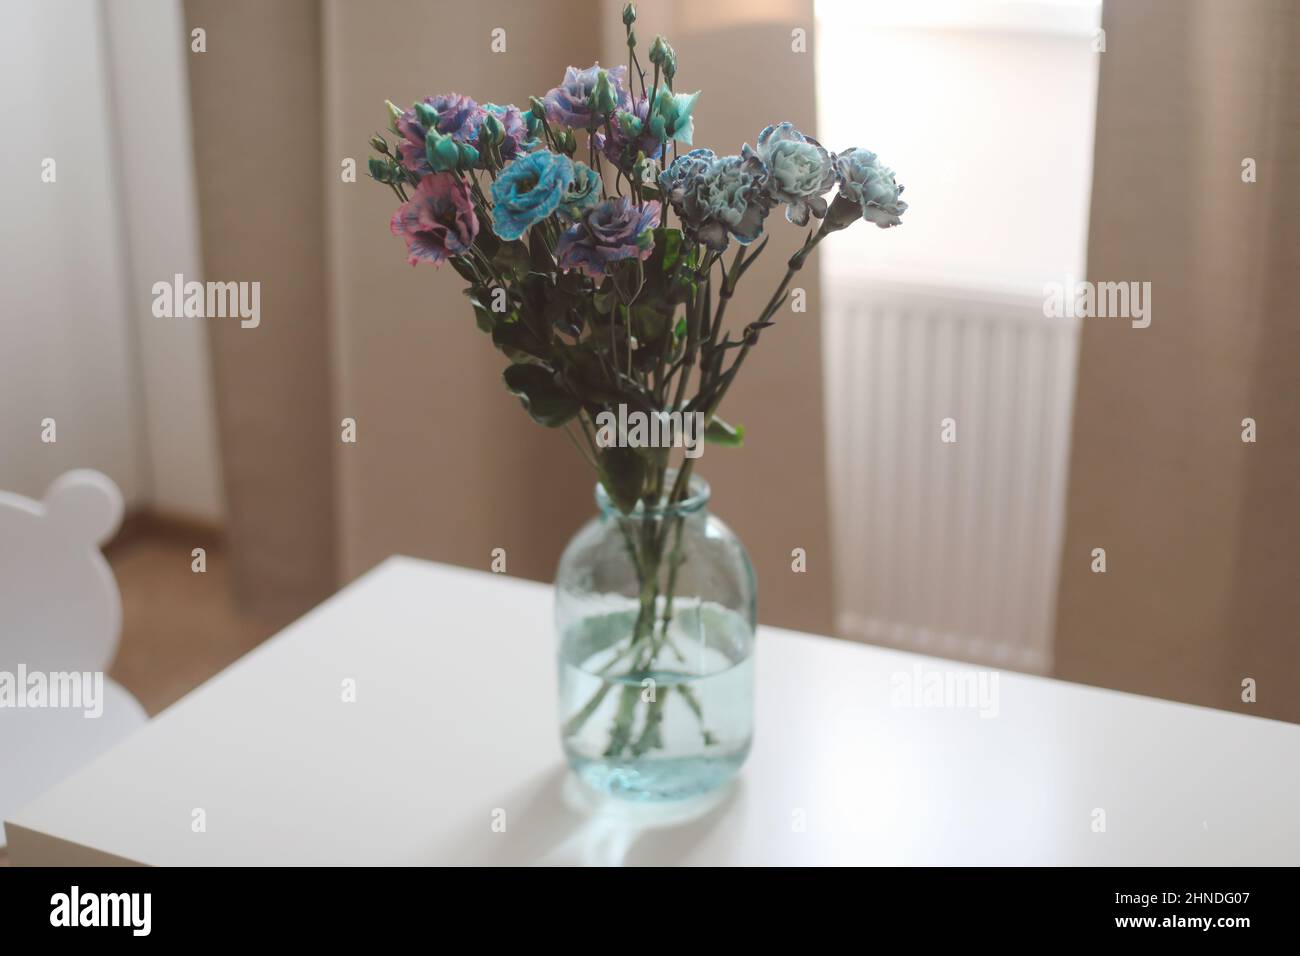 bunch of blue and purple flowers in a jar on the table in a sunny room, minimal home decor. Stock Photo